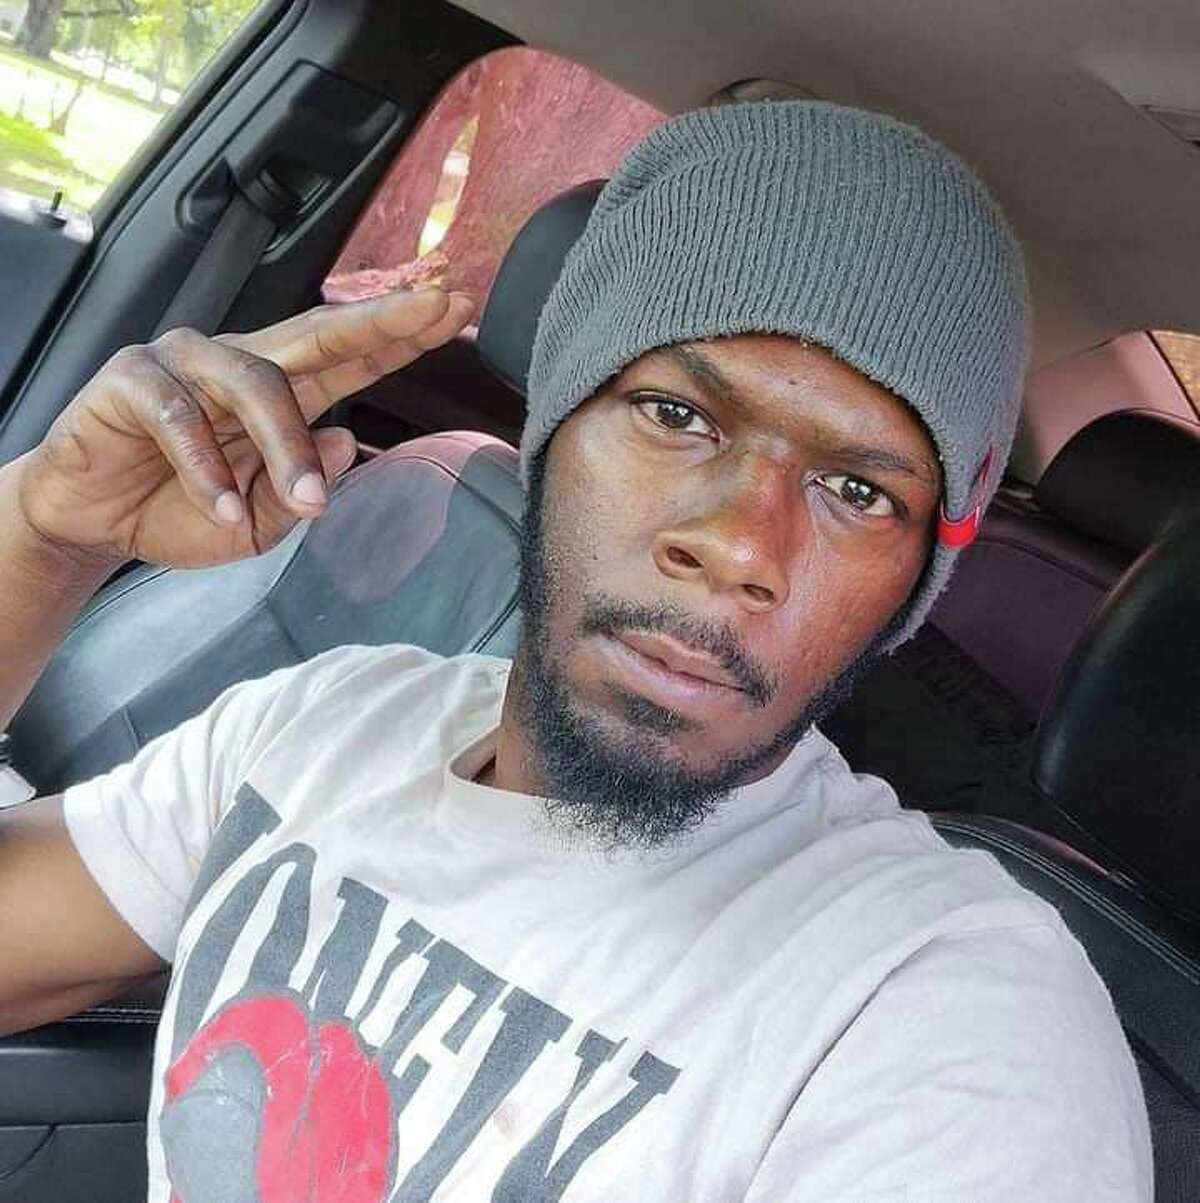 Beaumont Police Department Officer and Spokesperson Haley Morrow confirmed on Friday that no arrests have been made at this time in connection to the fatal June 24 shooting of 35-year-old Beaumont resident Ronald Bob (pictured here). Police are asking the community to help with the case.